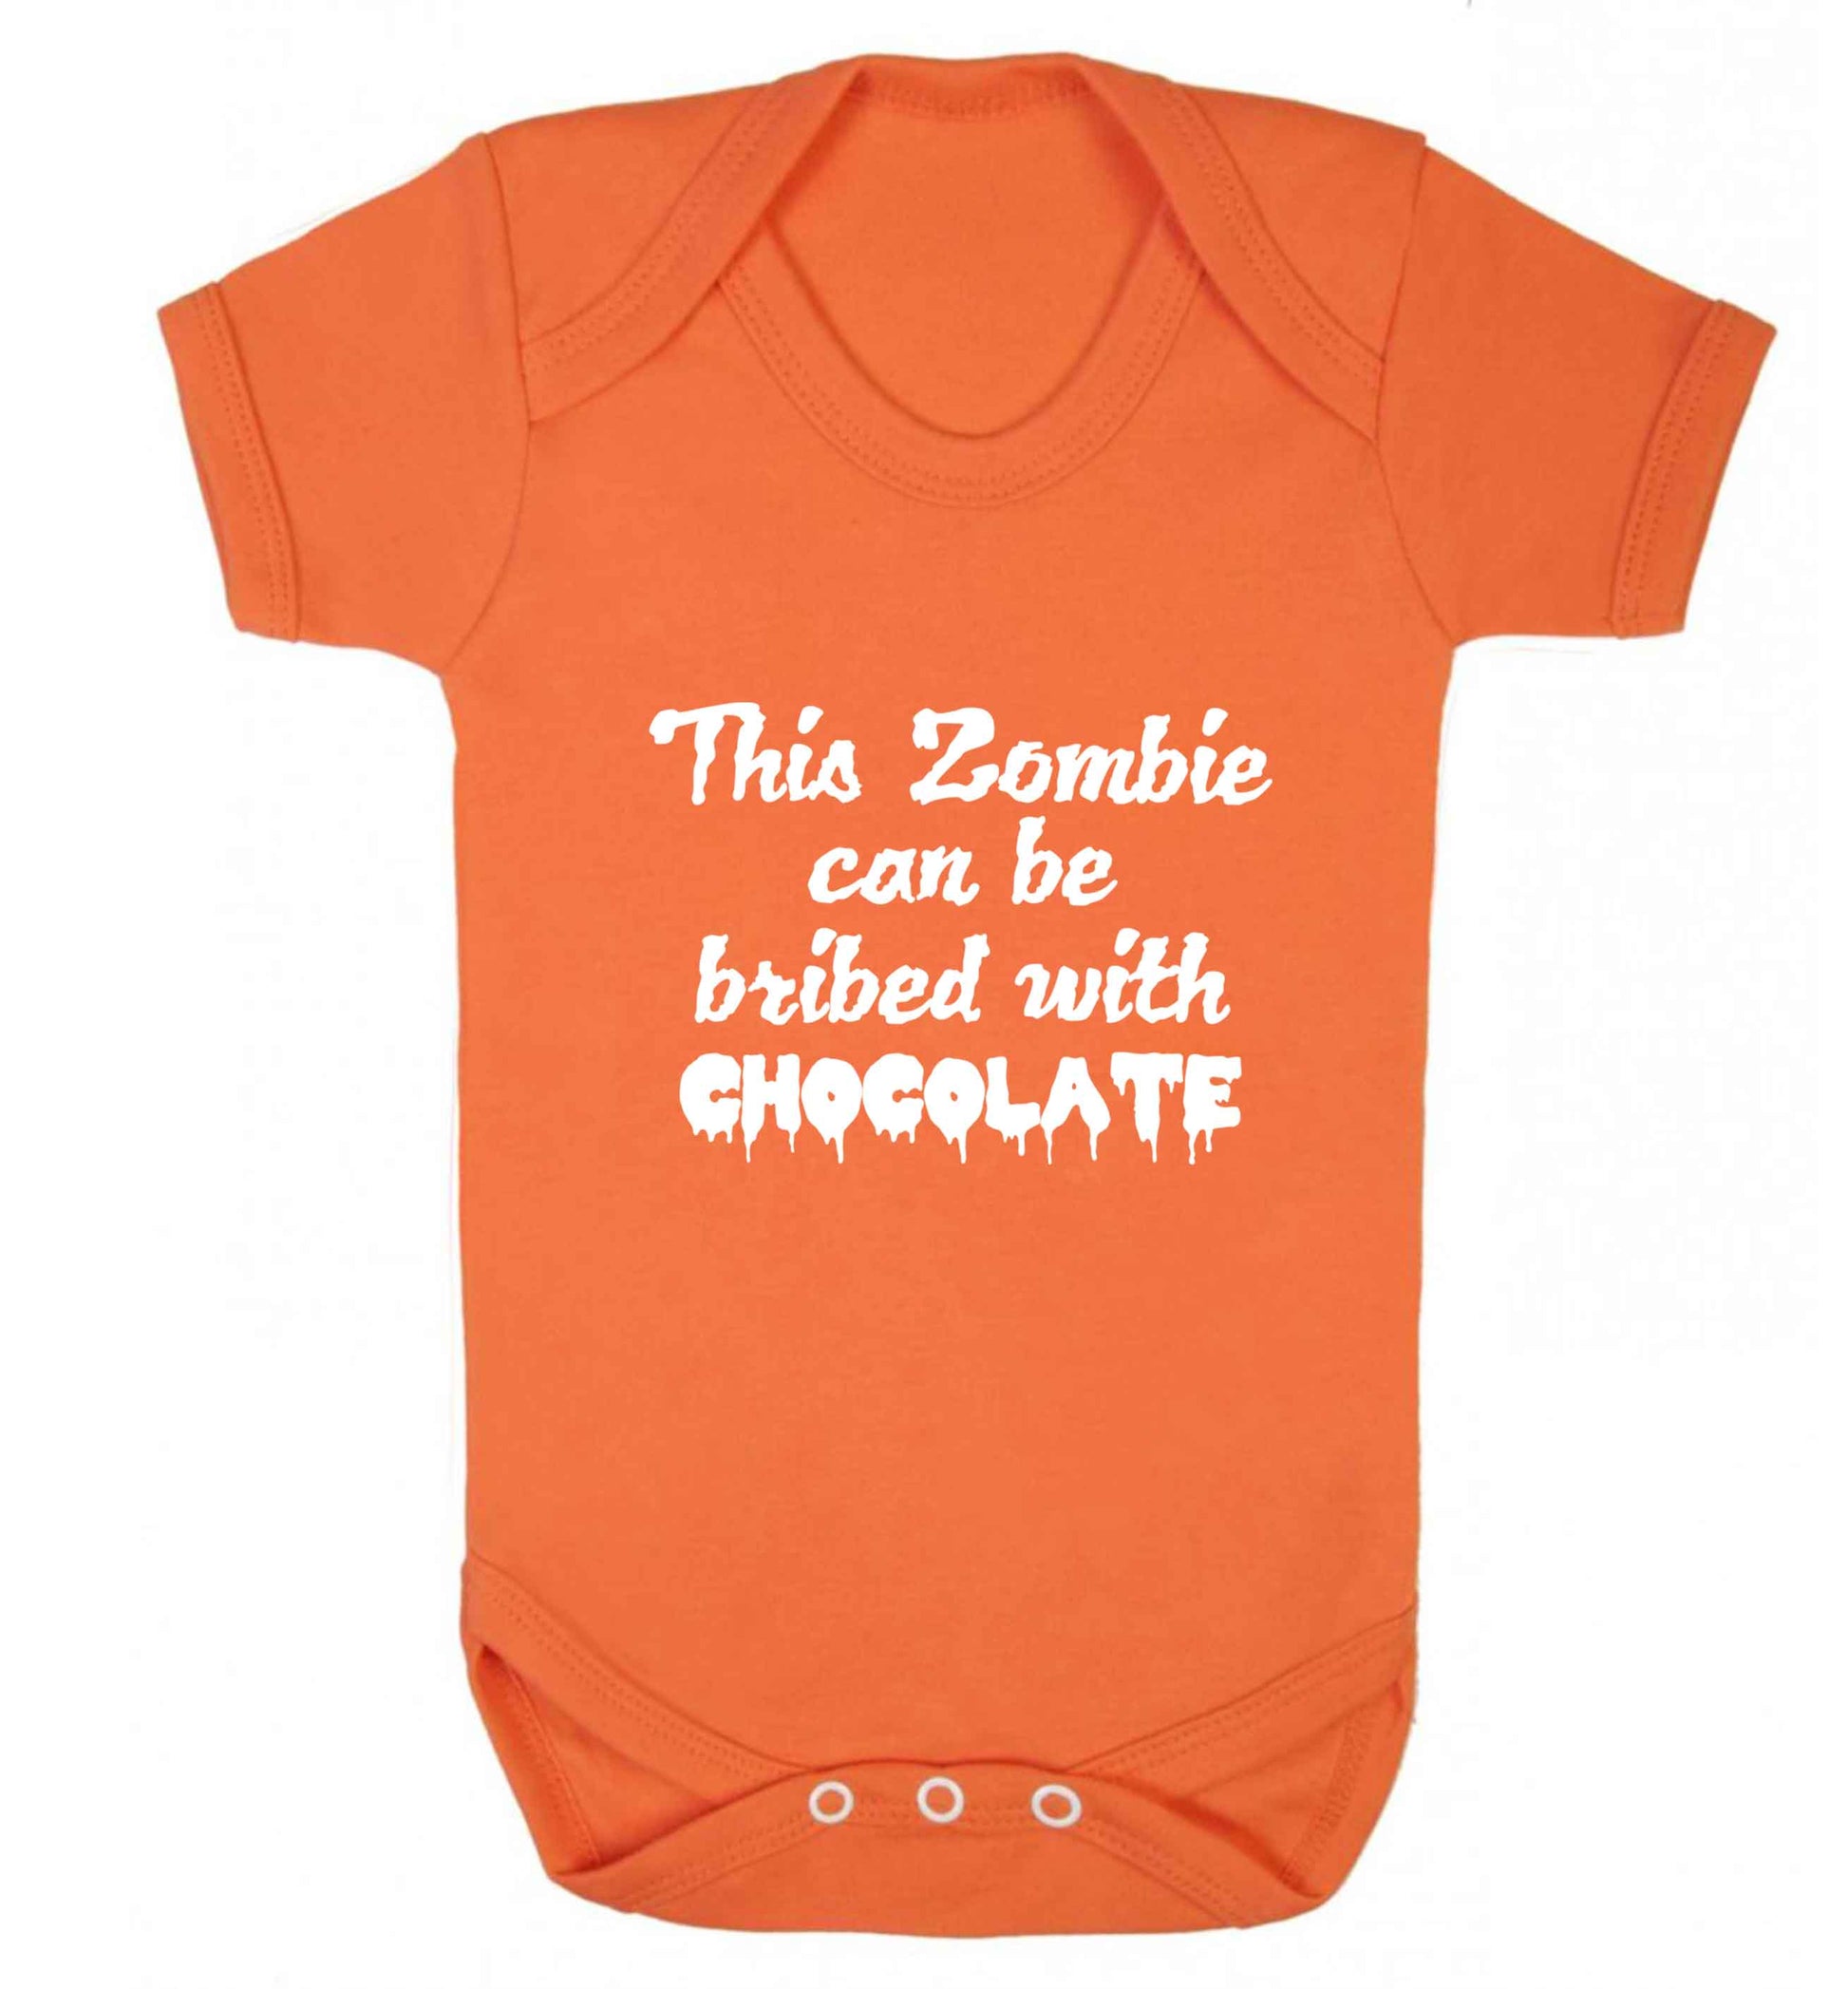 This zombie can be bribed with chocolate baby vest orange 18-24 months